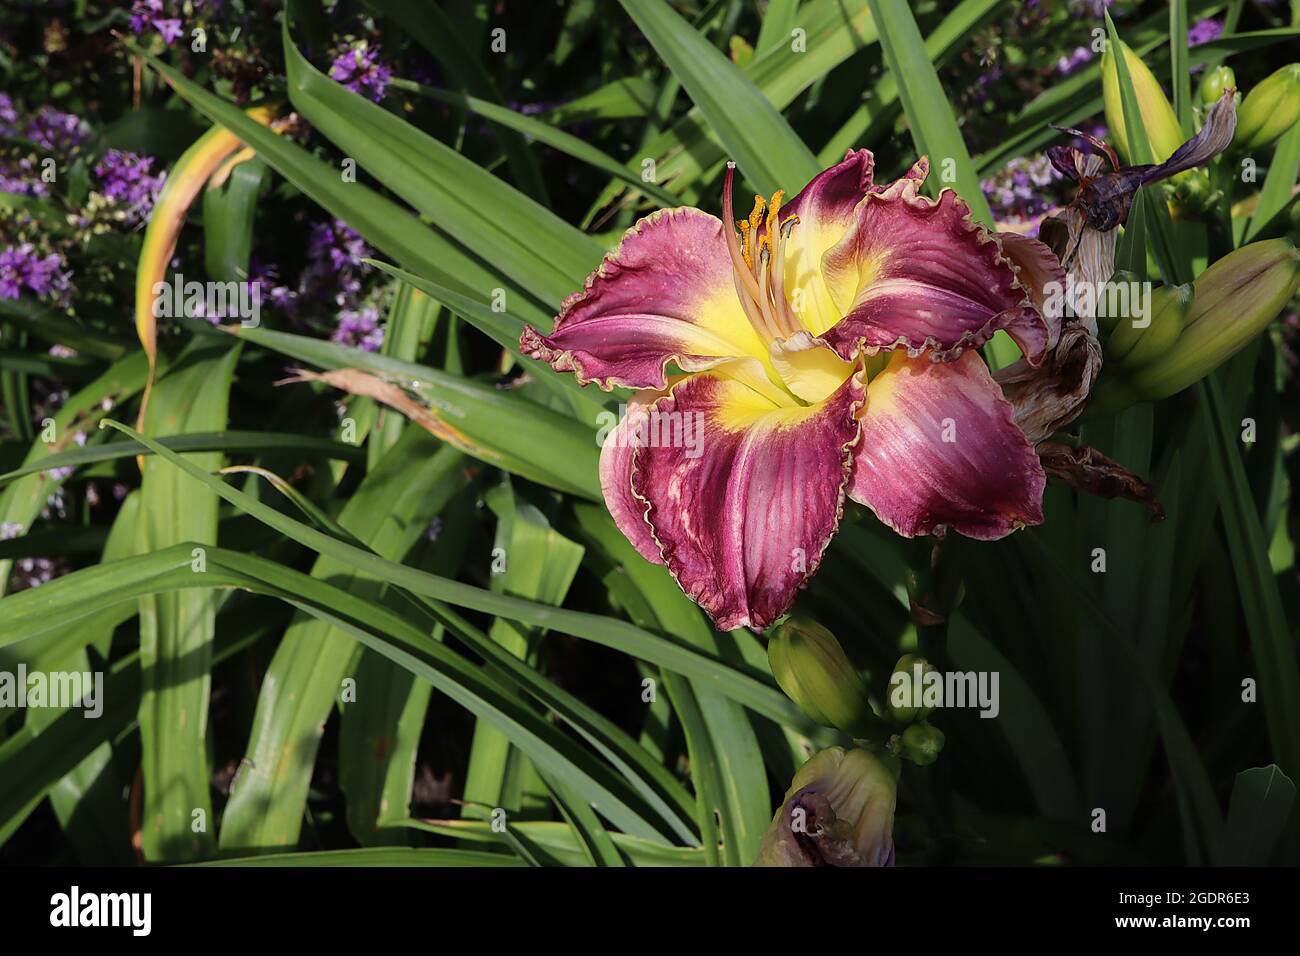 Hemerocallis / daylily ‘Ring the Bells of Heaven’ funnel-shaped purple flowers with frilly margins, white midrib and yellow throat,  July, England, UK Stock Photo